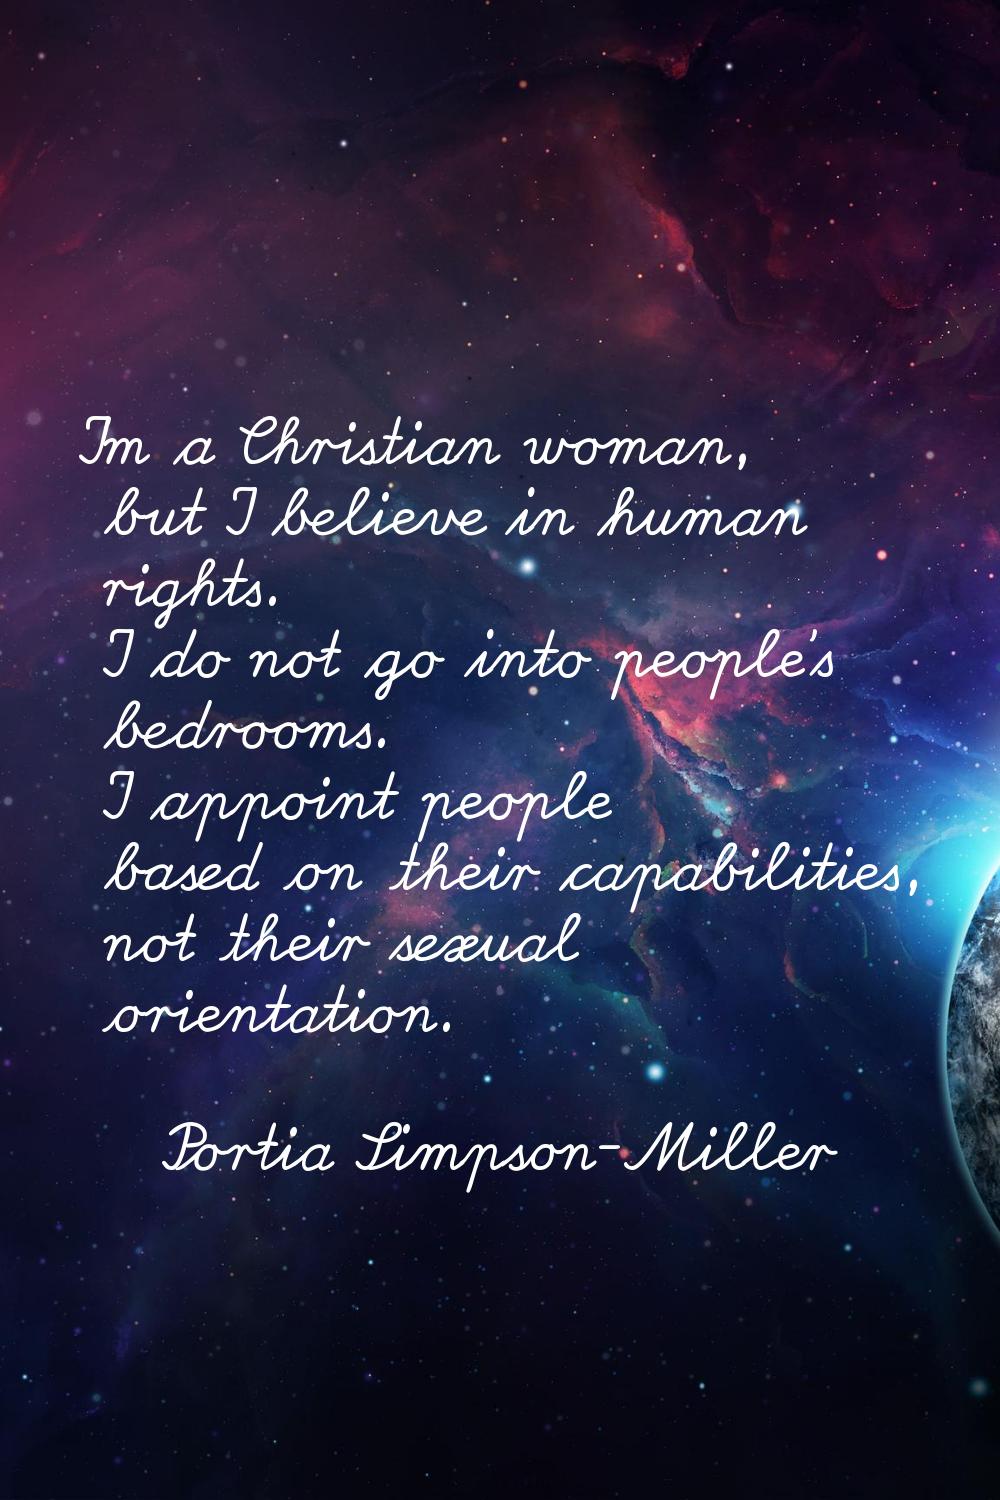 I'm a Christian woman, but I believe in human rights. I do not go into people's bedrooms. I appoint